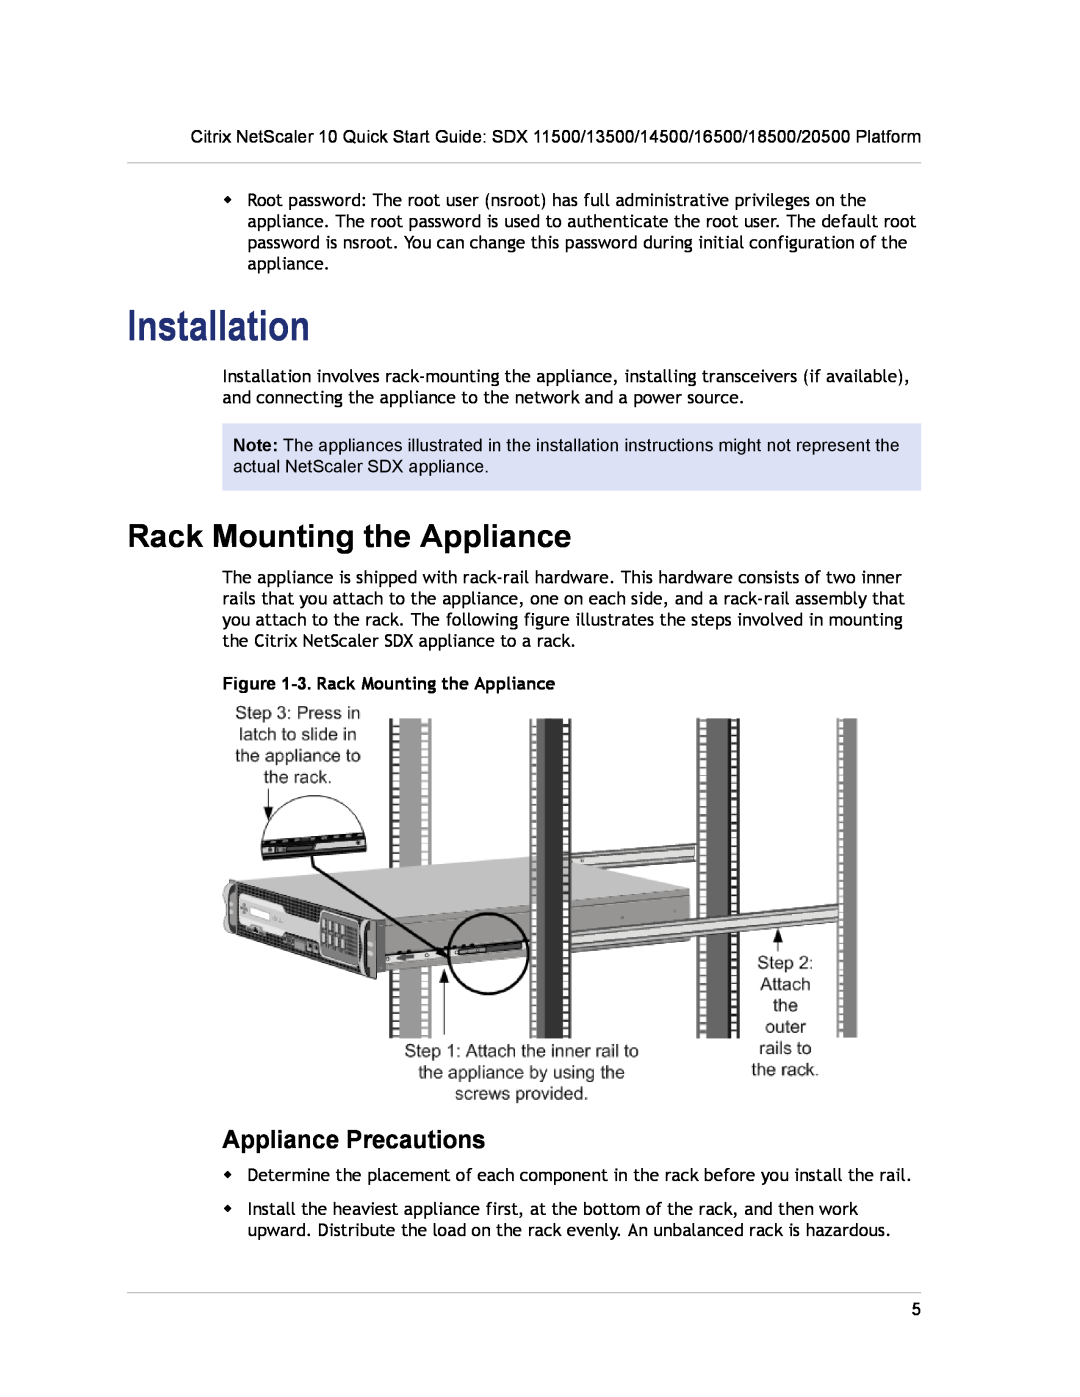 Citrix Systems SDX 14500, SDX 13500, SDX 16500 Installation, Appliance Precautions, 3. Rack Mounting the Appliance 